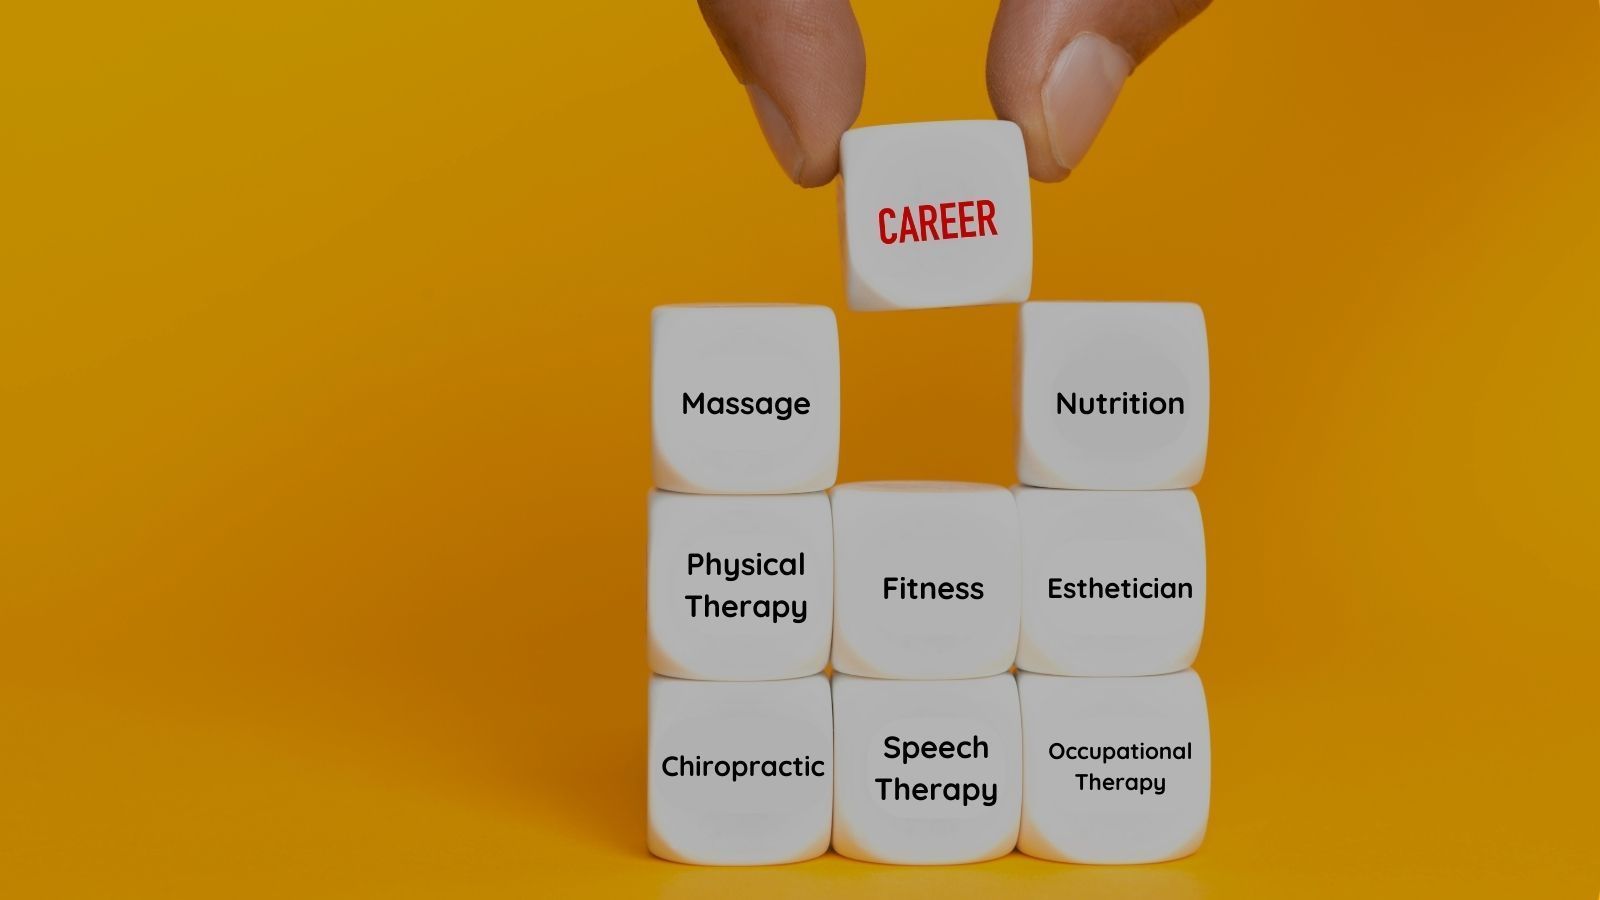 dice listing different health and wellness careers, including massage